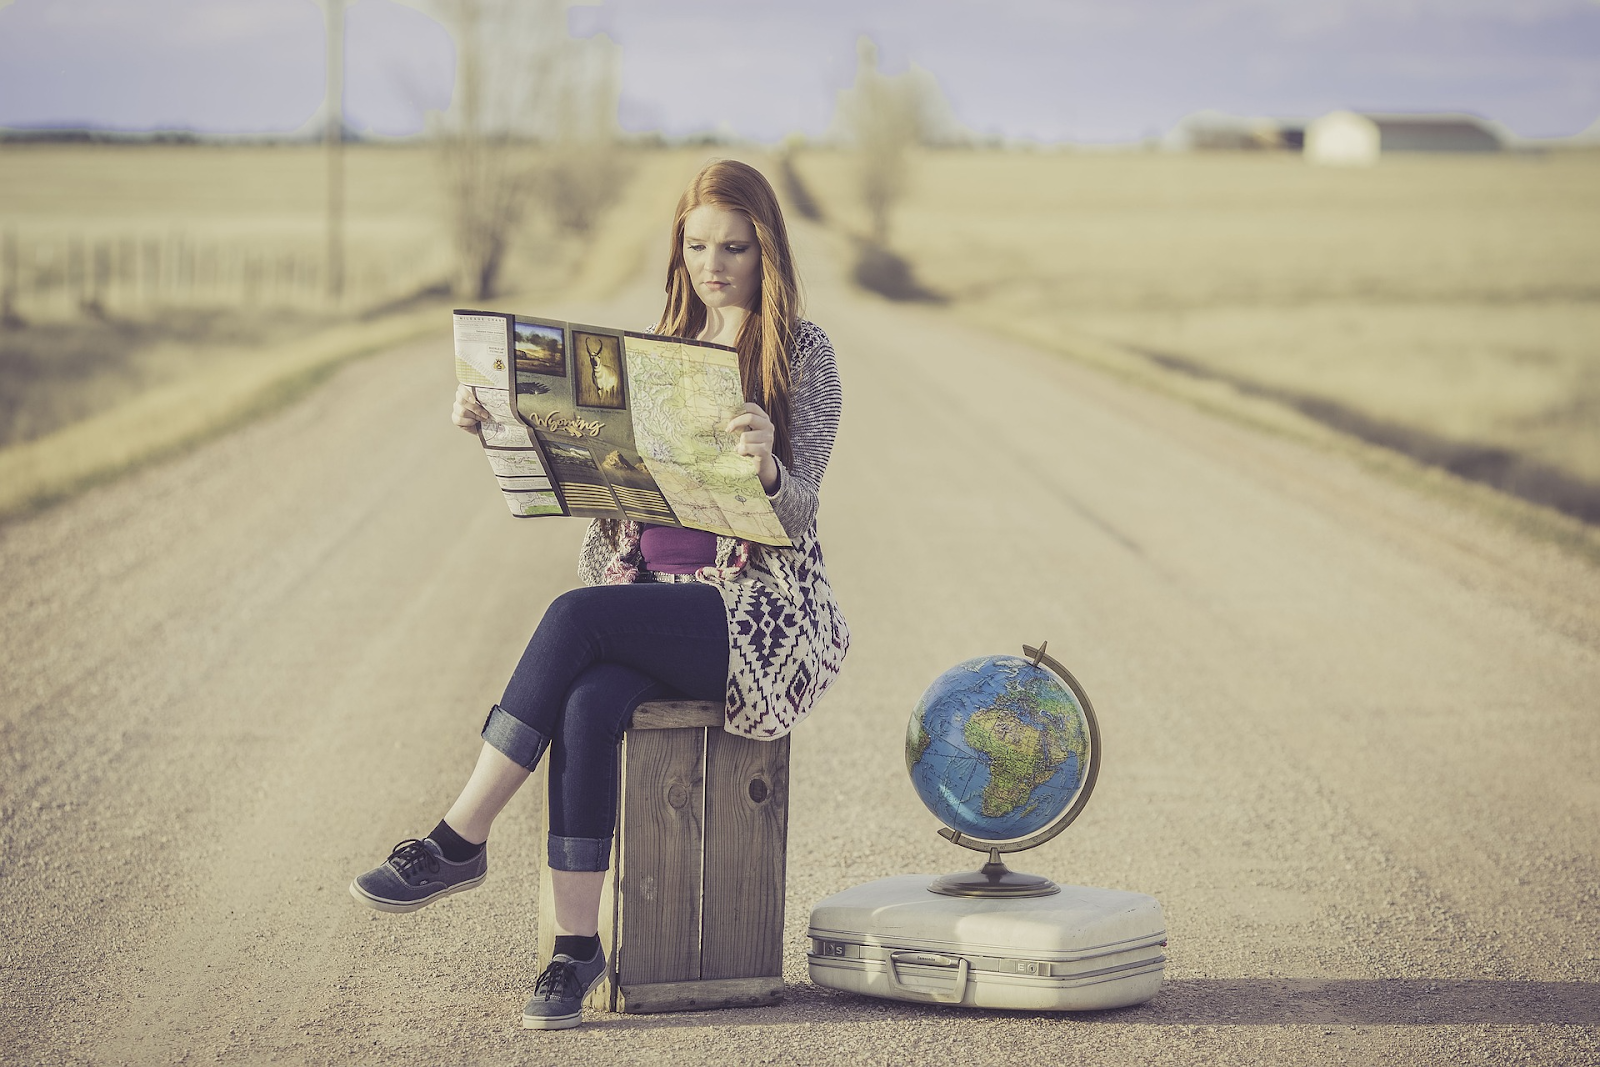 Girl sitting in a road reading a map with a globe and suitcase next to her